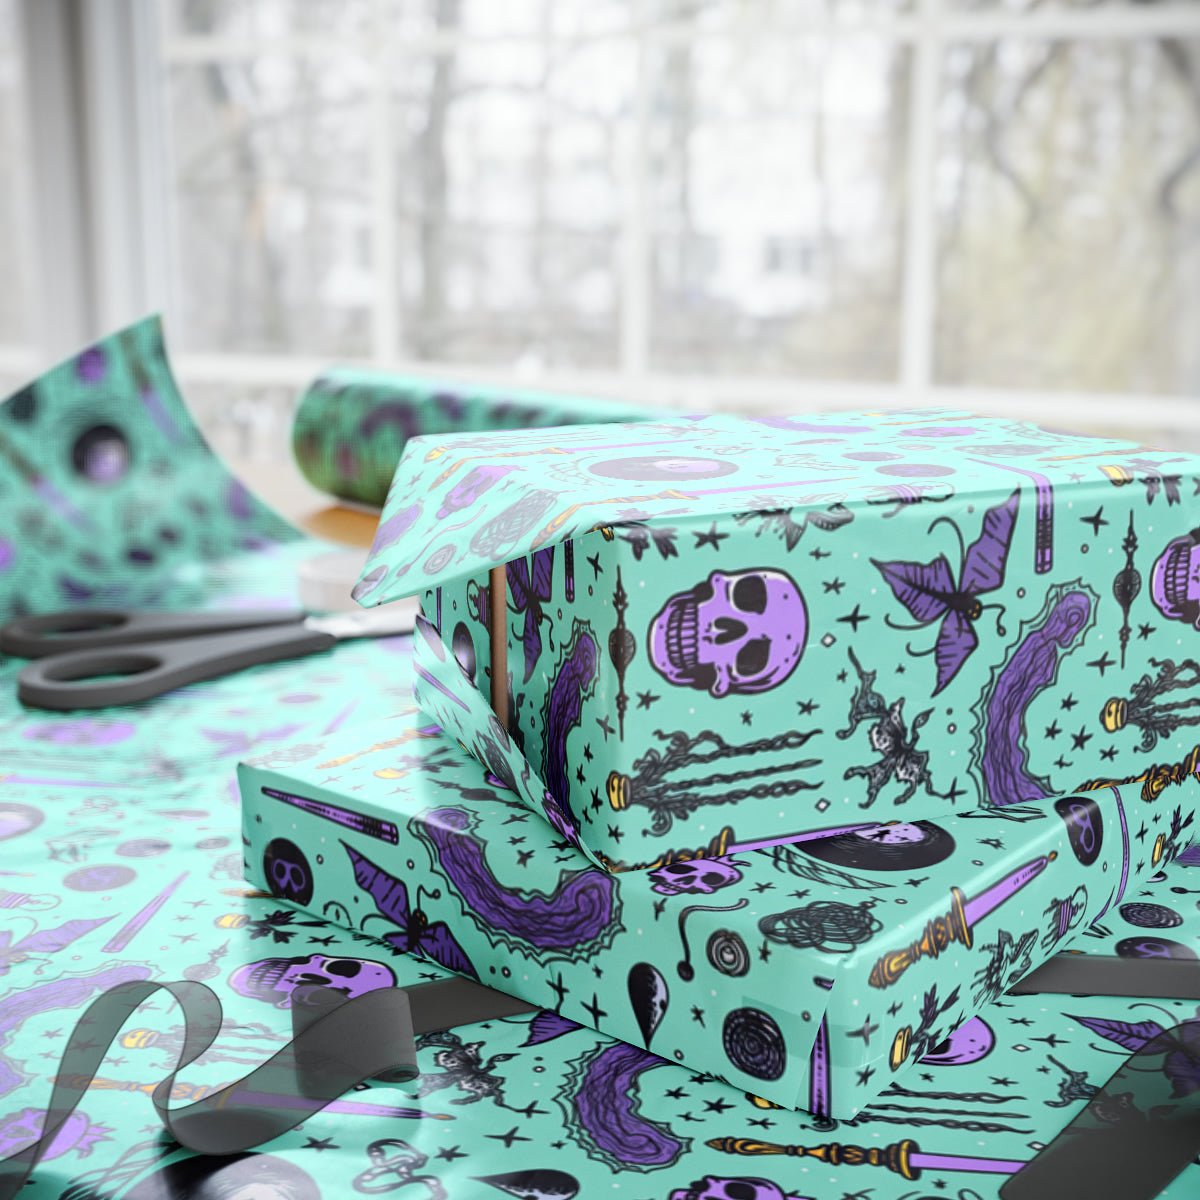 Gothic Pastel Wrapping Paper: Skulls, Candles & Crystals - Goth Cloth Co.Home Decor31224470151549359492